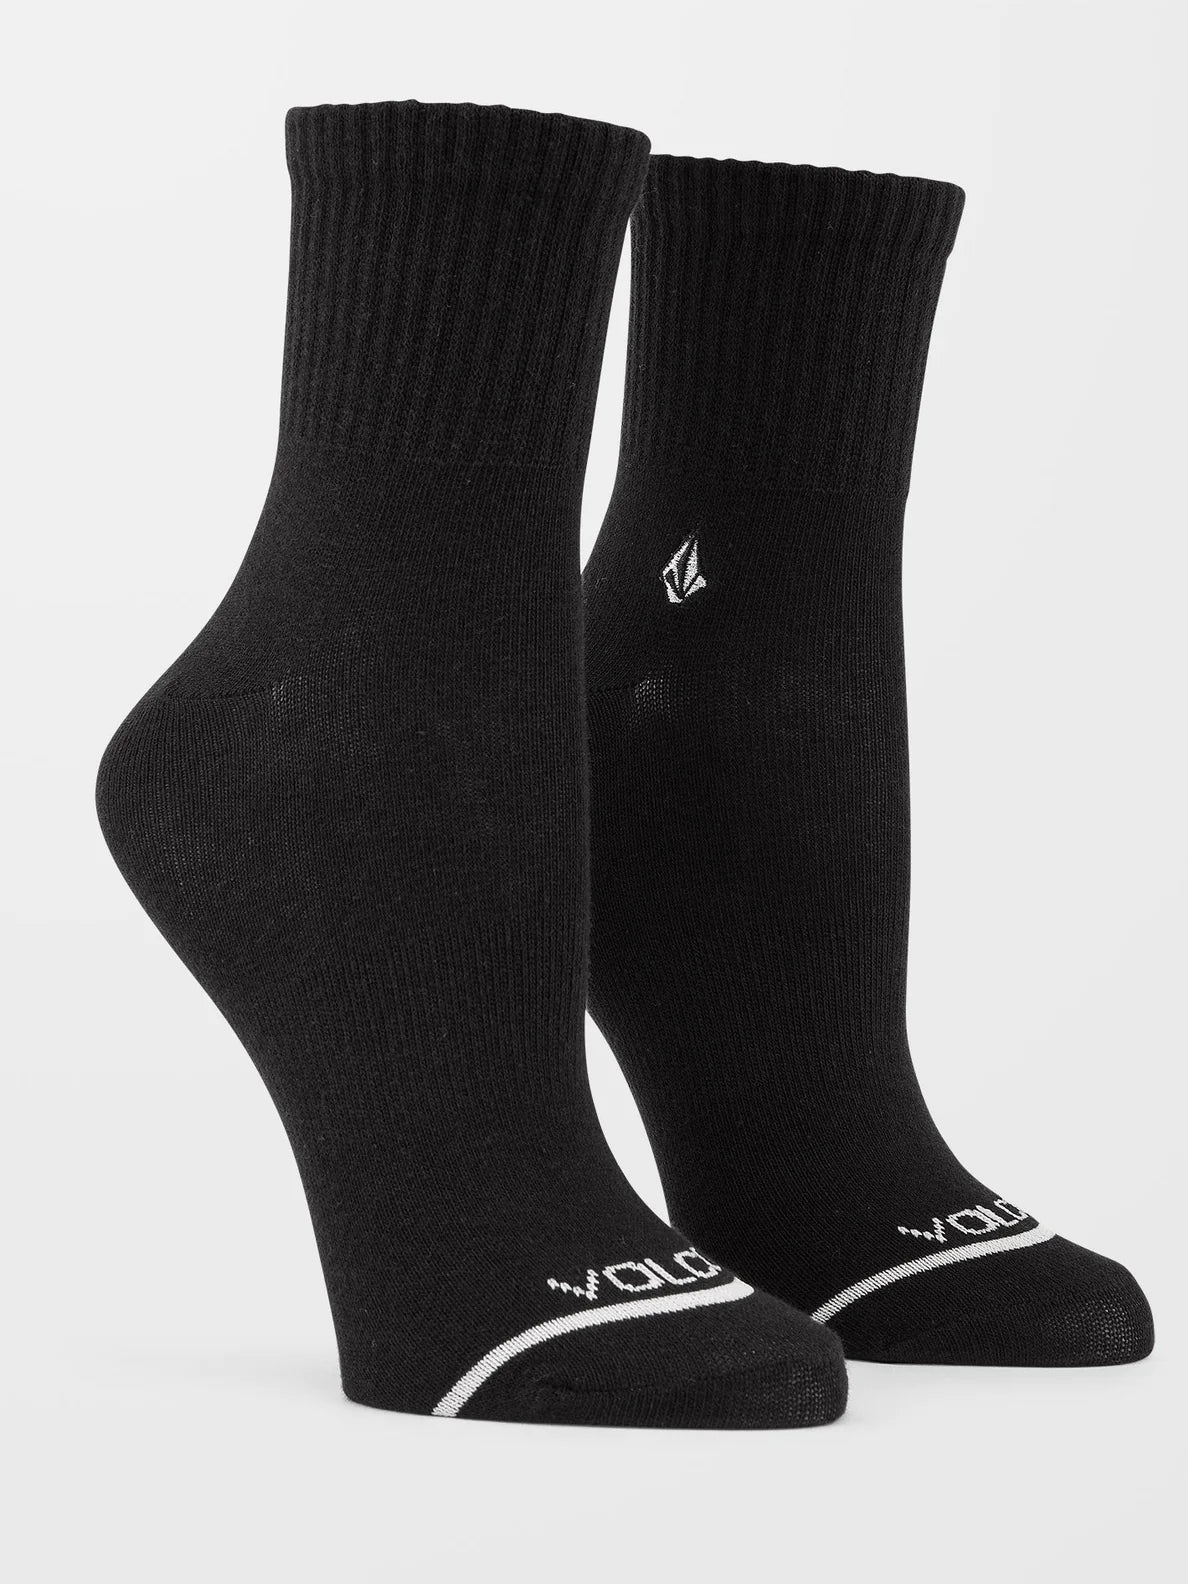 Calcetines Mujer Volcom The New Crew - Multi (Pack 3) | Calcetines | Volcom Shop | surfdevils.com